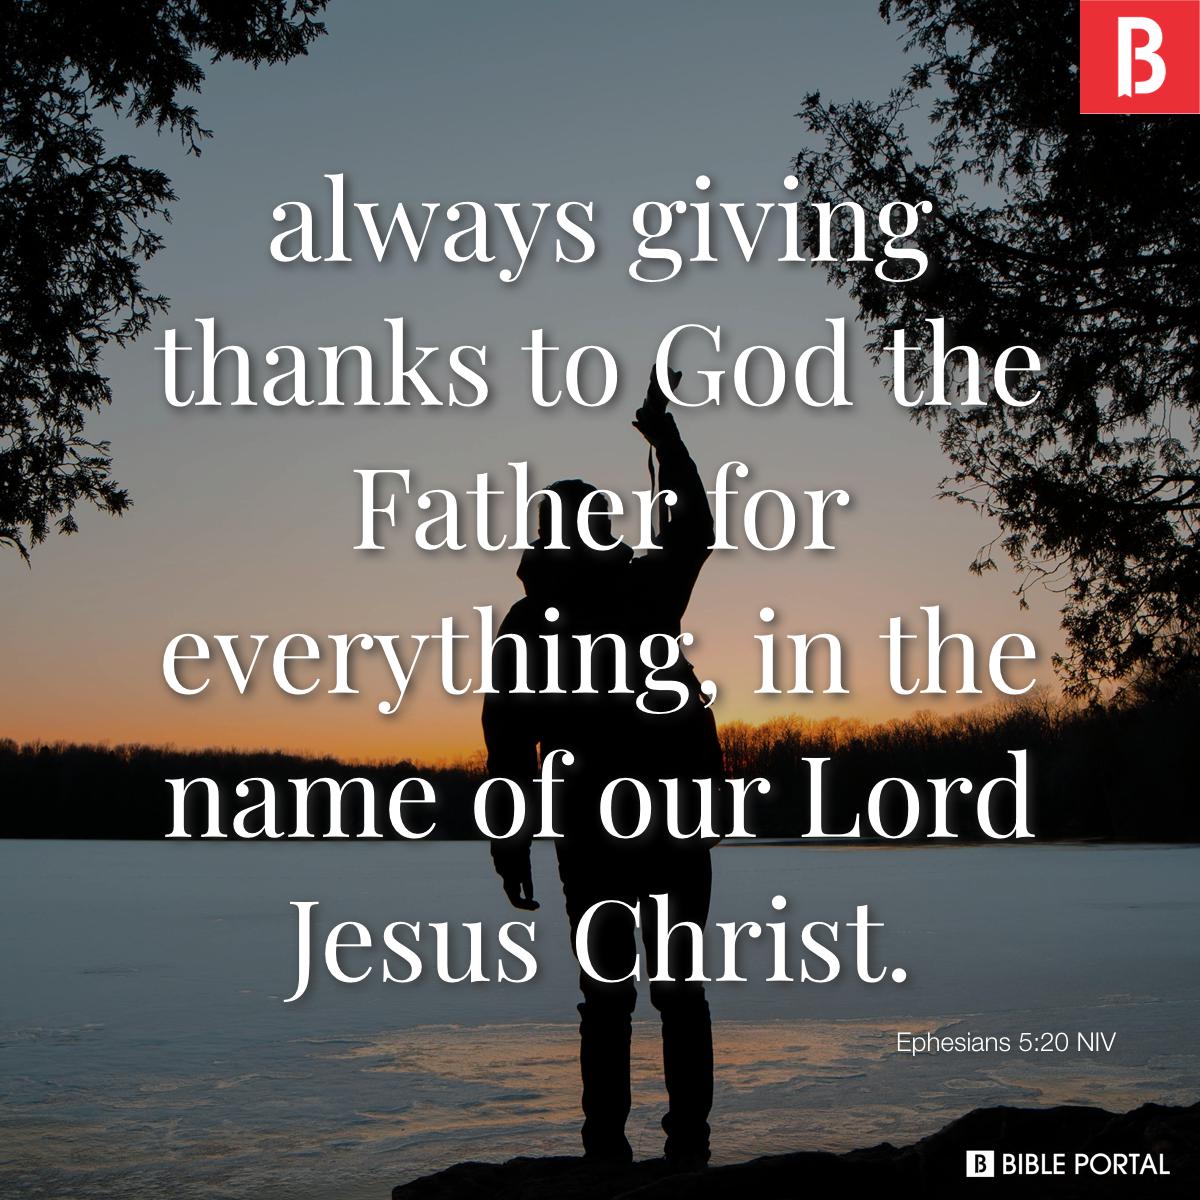 ephesians520-always-giving-thanks-to-god-the-father-for-everything-in-the-n-NIV-8547-9